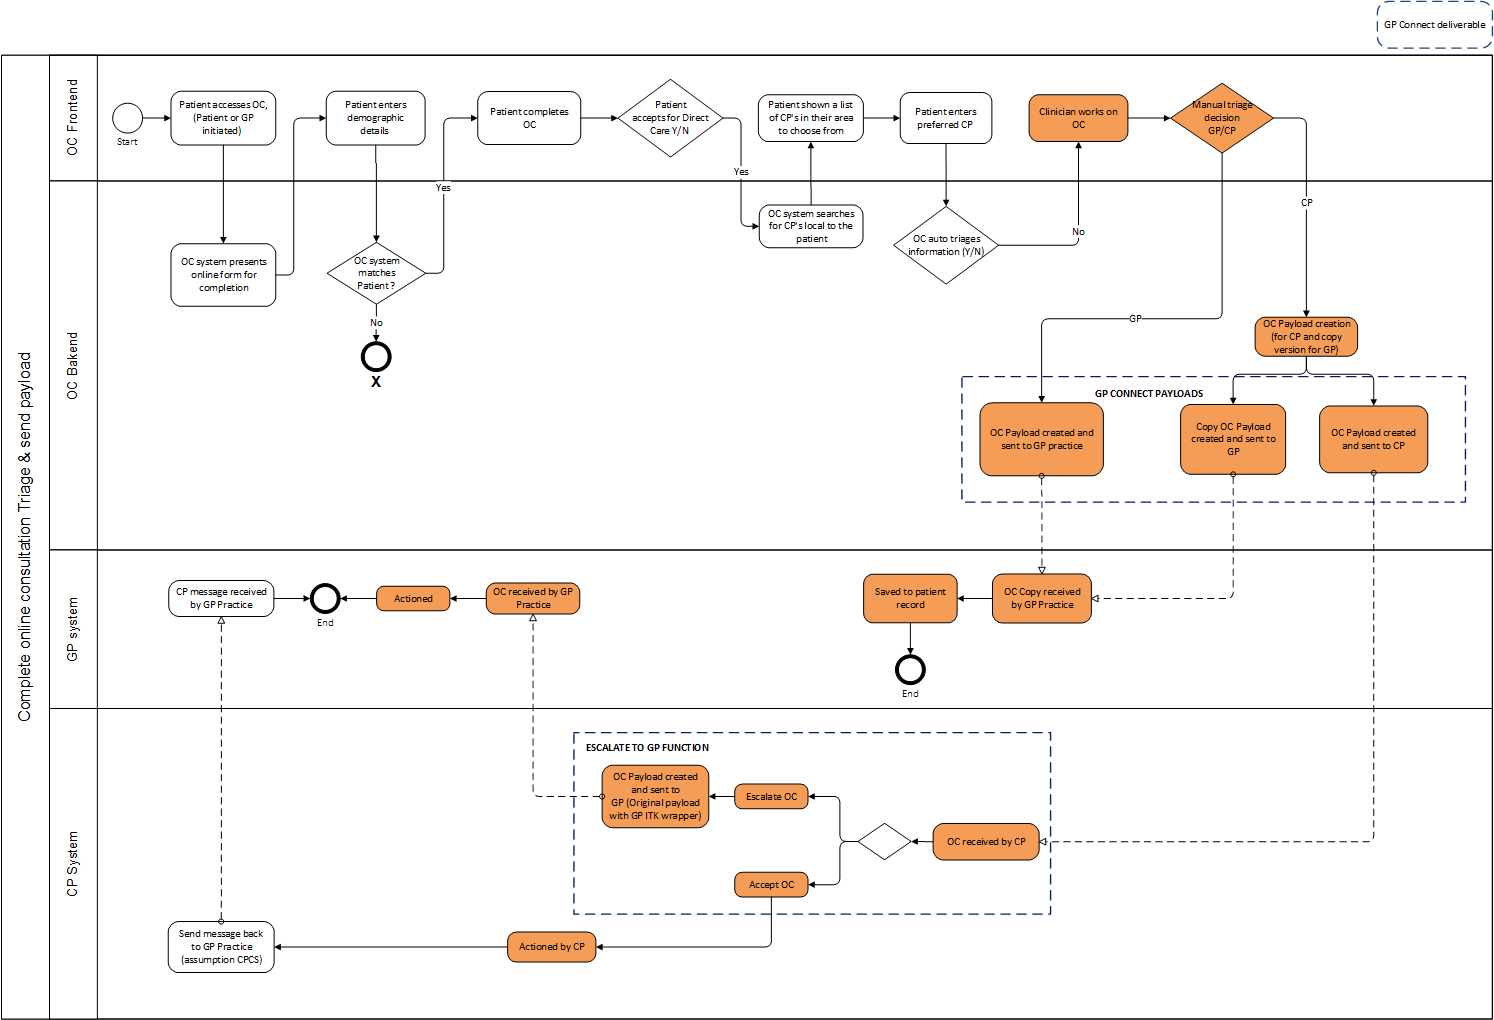 Online Consultation Report process map